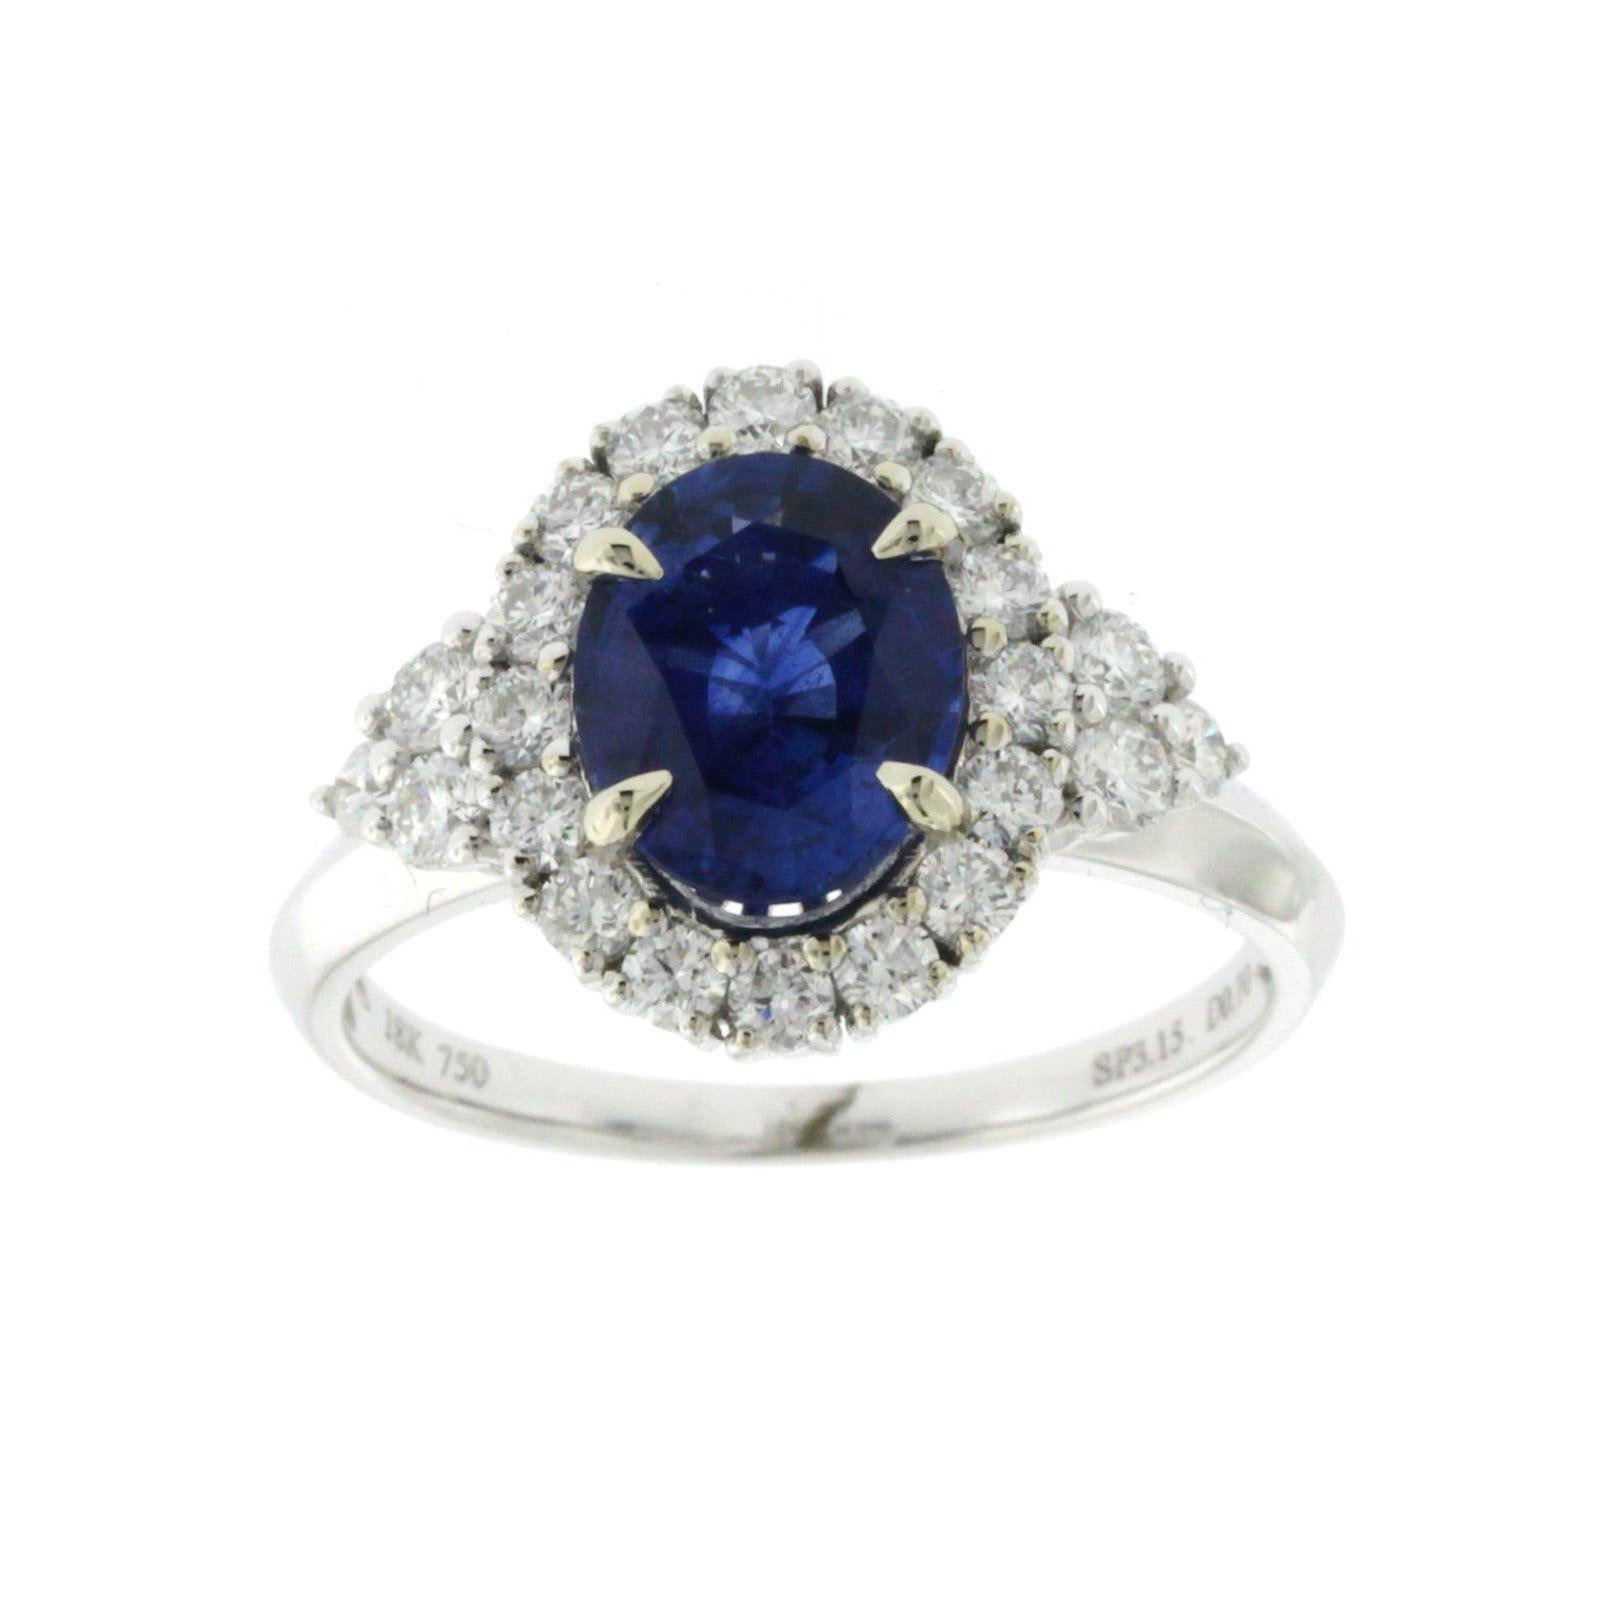 Top: 13.6 mm
Band Width: 1.5 mm
Metal: 18K White Gold 
Size: 6-8 ( Please message Us for your Size )
Hallmarks: 750
Total Weight: 4.4 Grams
Stone Type: 2.14 CT Natural Ceylon Sapphires & 0.89 G VS2 CT Diamonds
Condition: New
Estimated Retail Price: